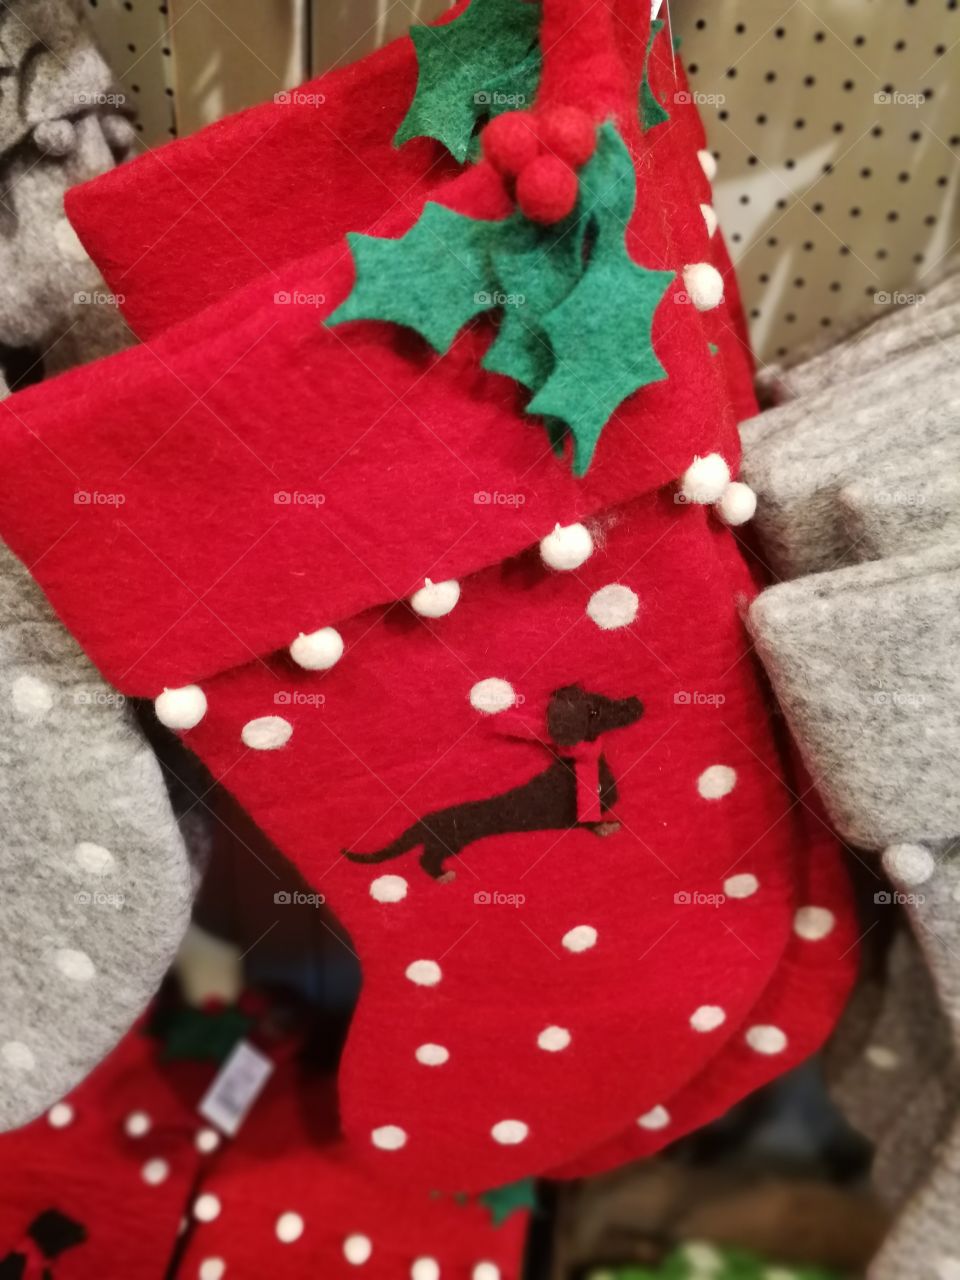 Christmas stockings in store